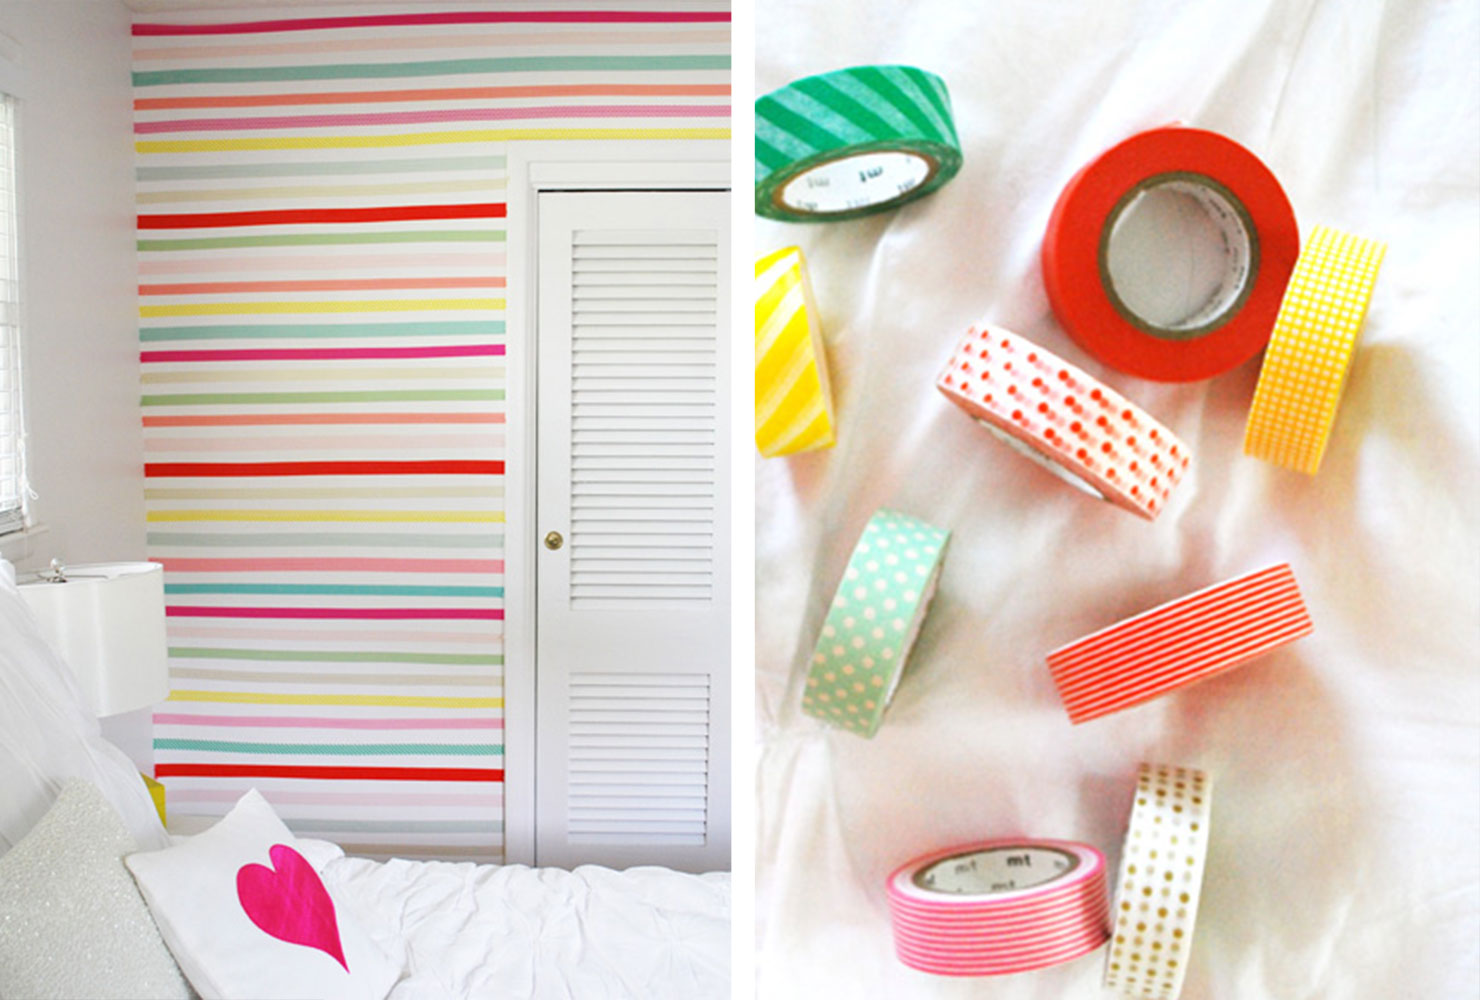 55 iDIY Room Decori Ideas to Decorate Your Home Shutterfly